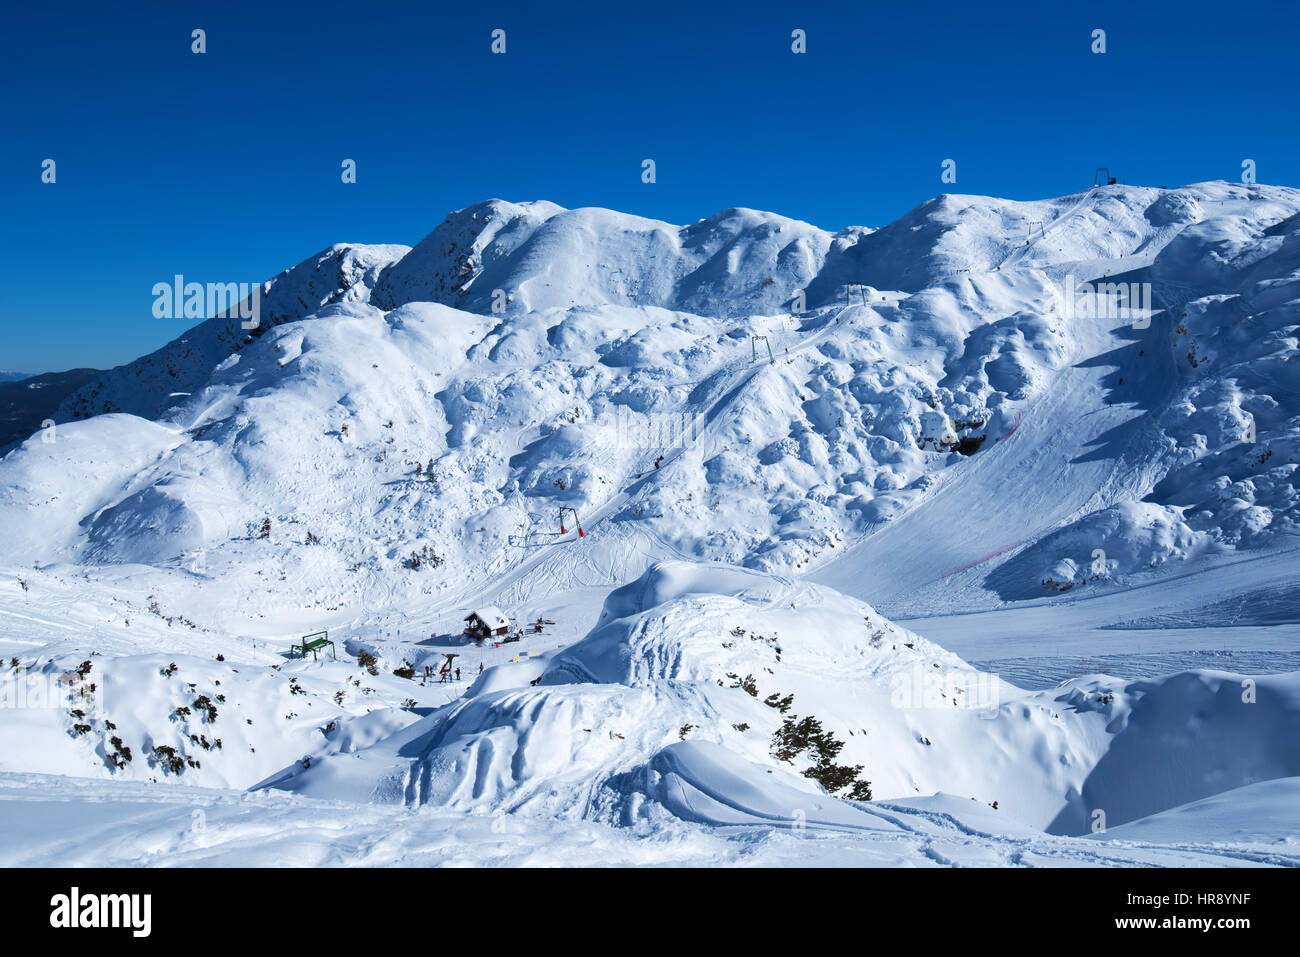 Ski slopes on snow capped mountain, bright sunny winter day with clear blue sky Stock Photo